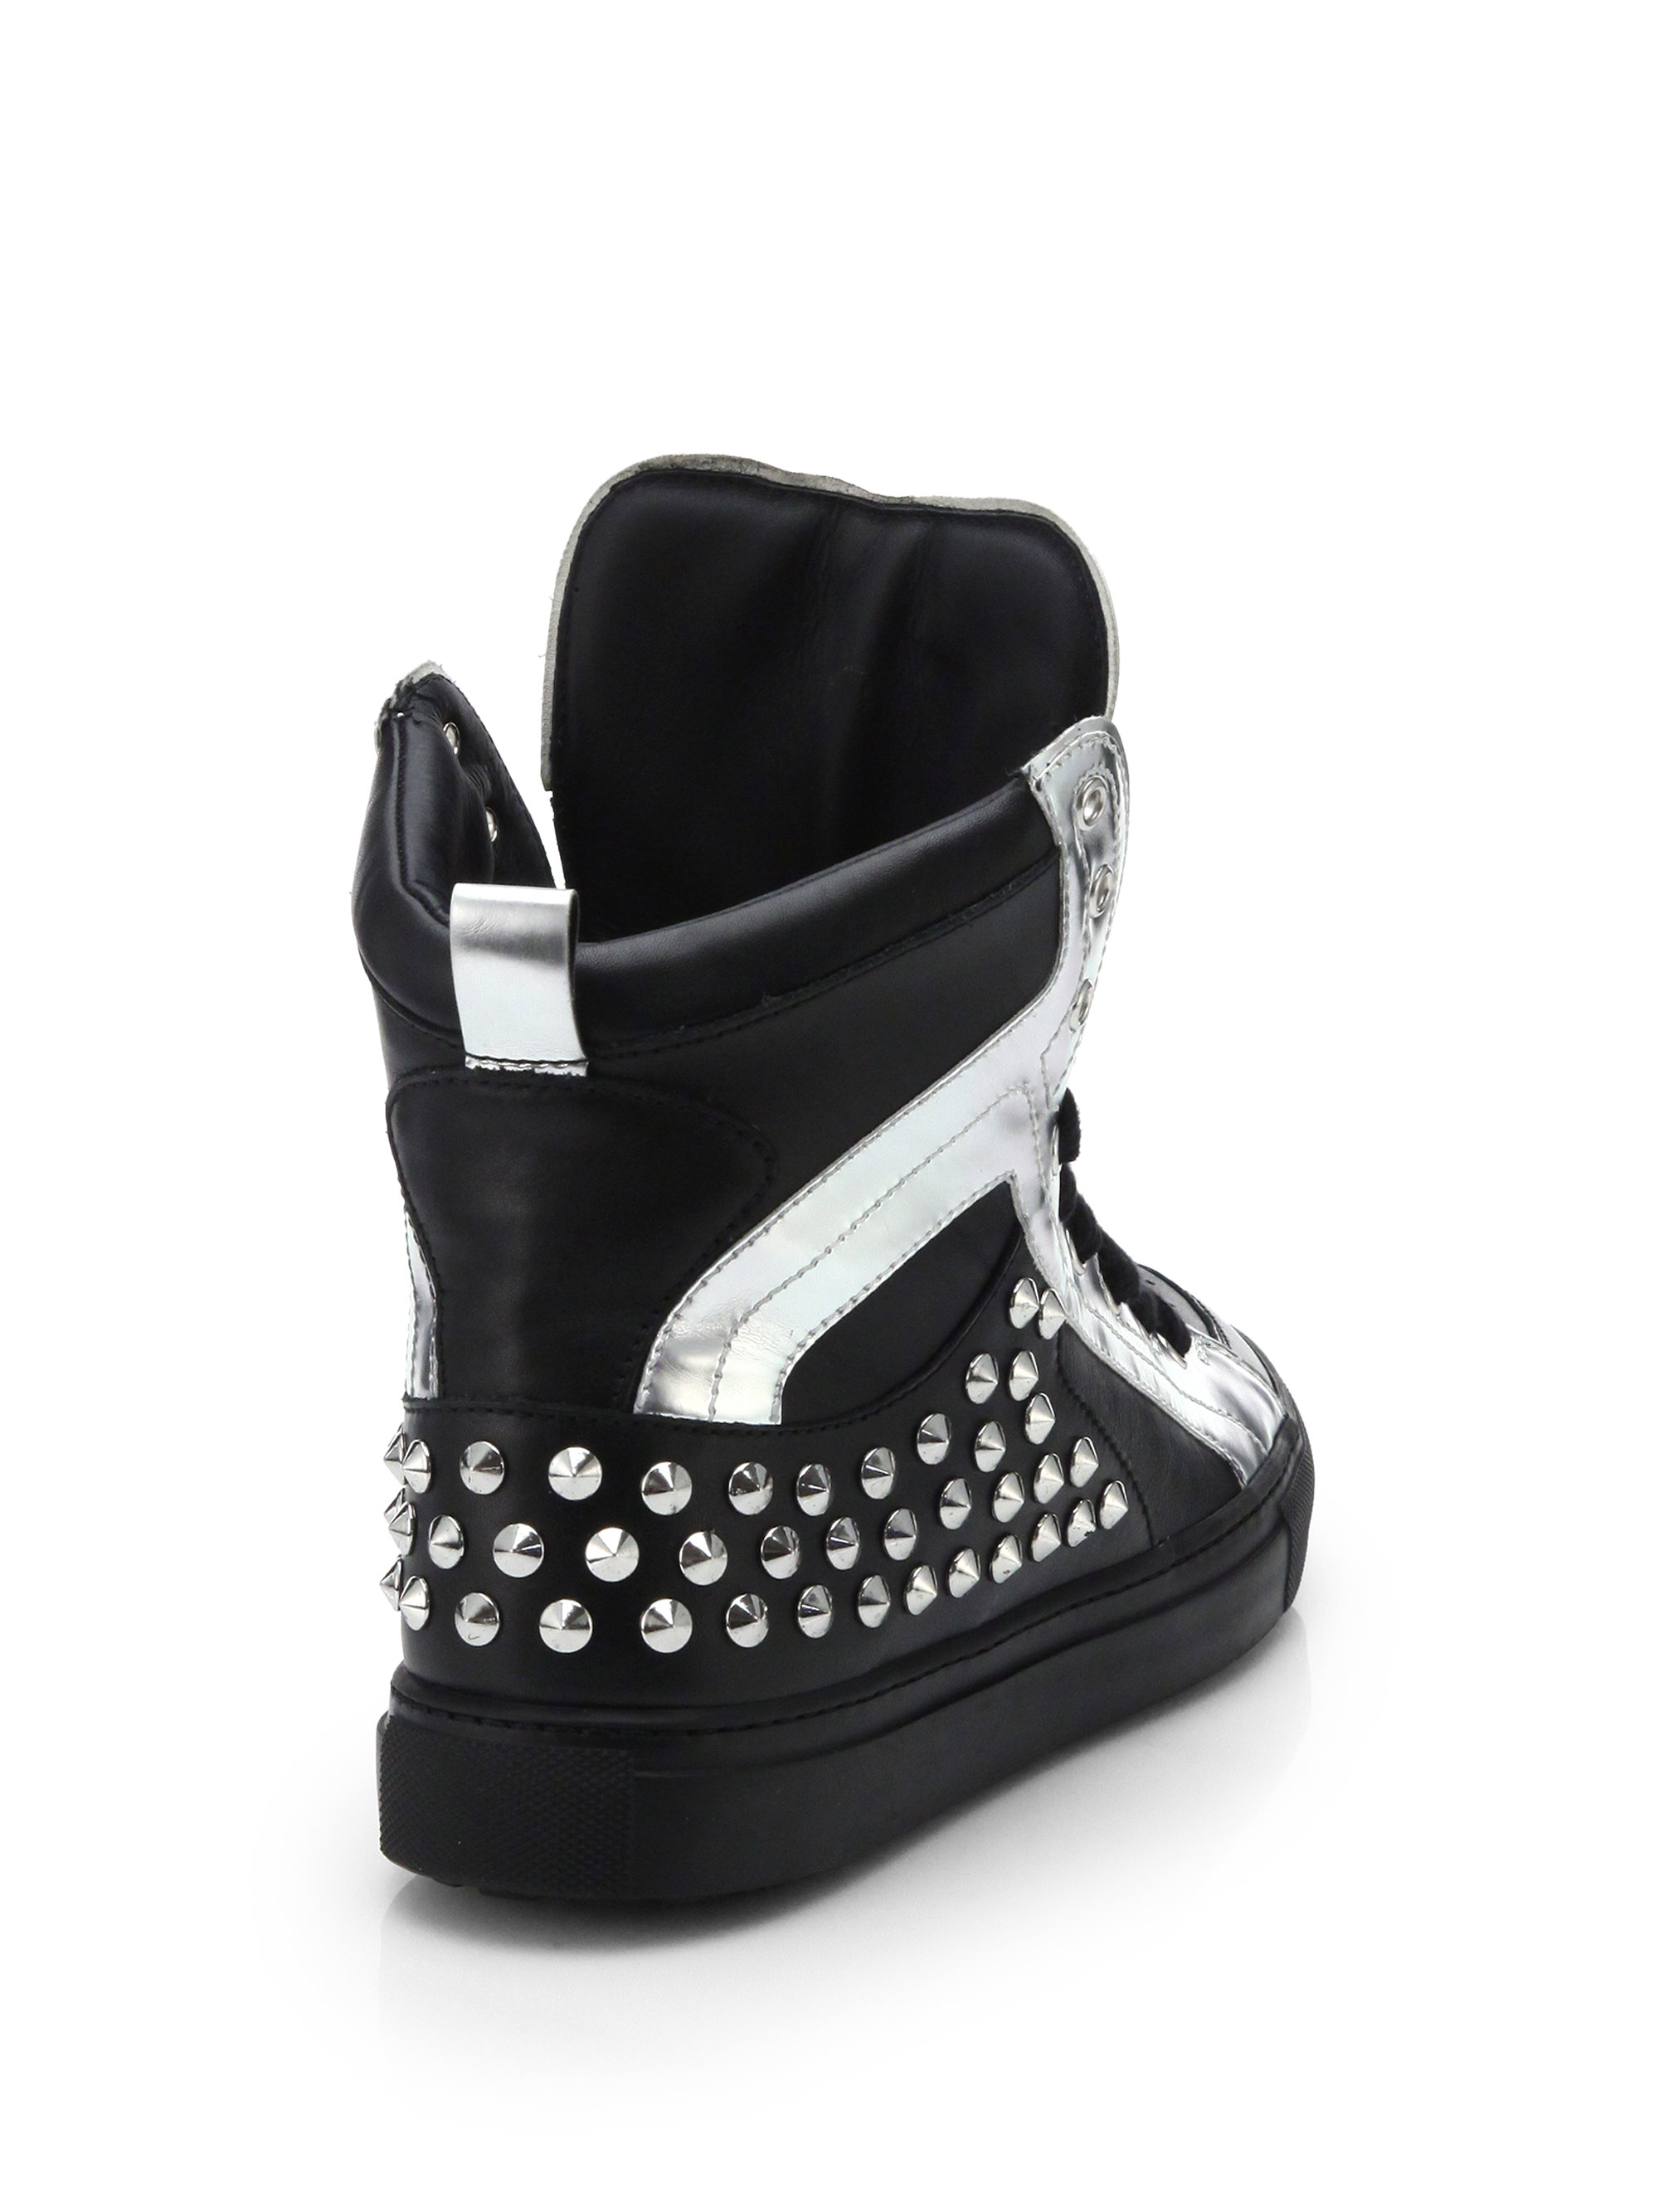 DSquared² Studded Leather High-top Sneakers in Black for Men | Lyst